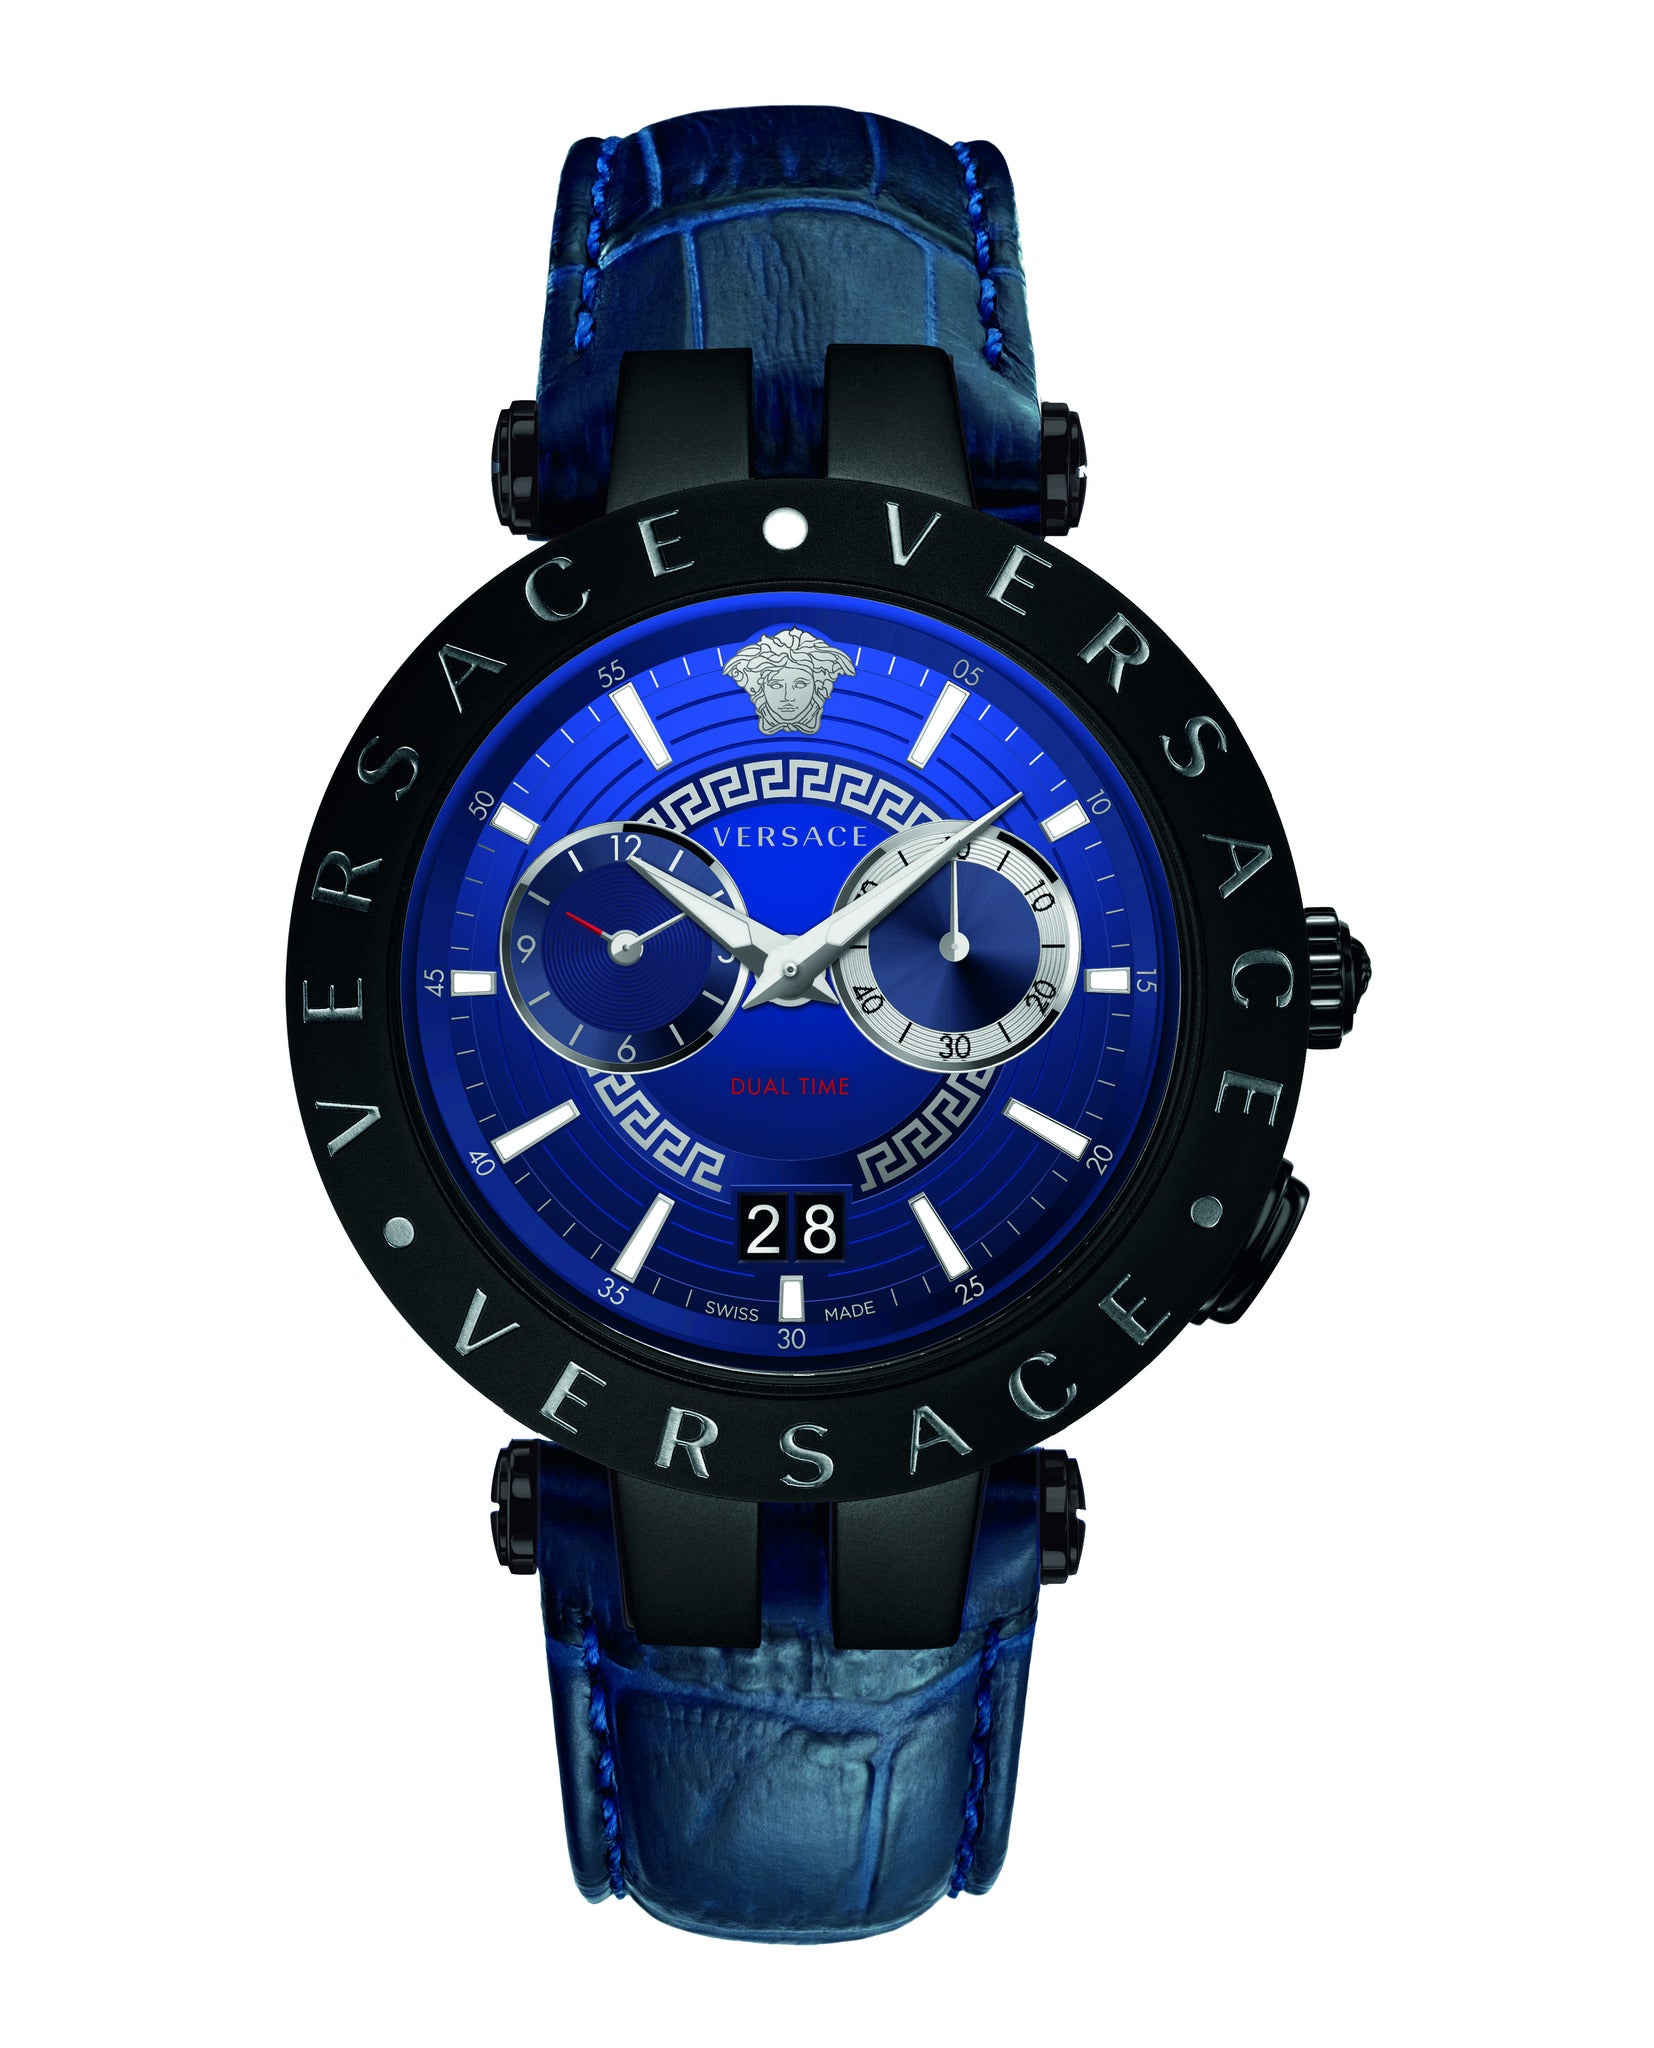 VERSACE V-RACE MULTIFUNCTION LEATHER WATCH